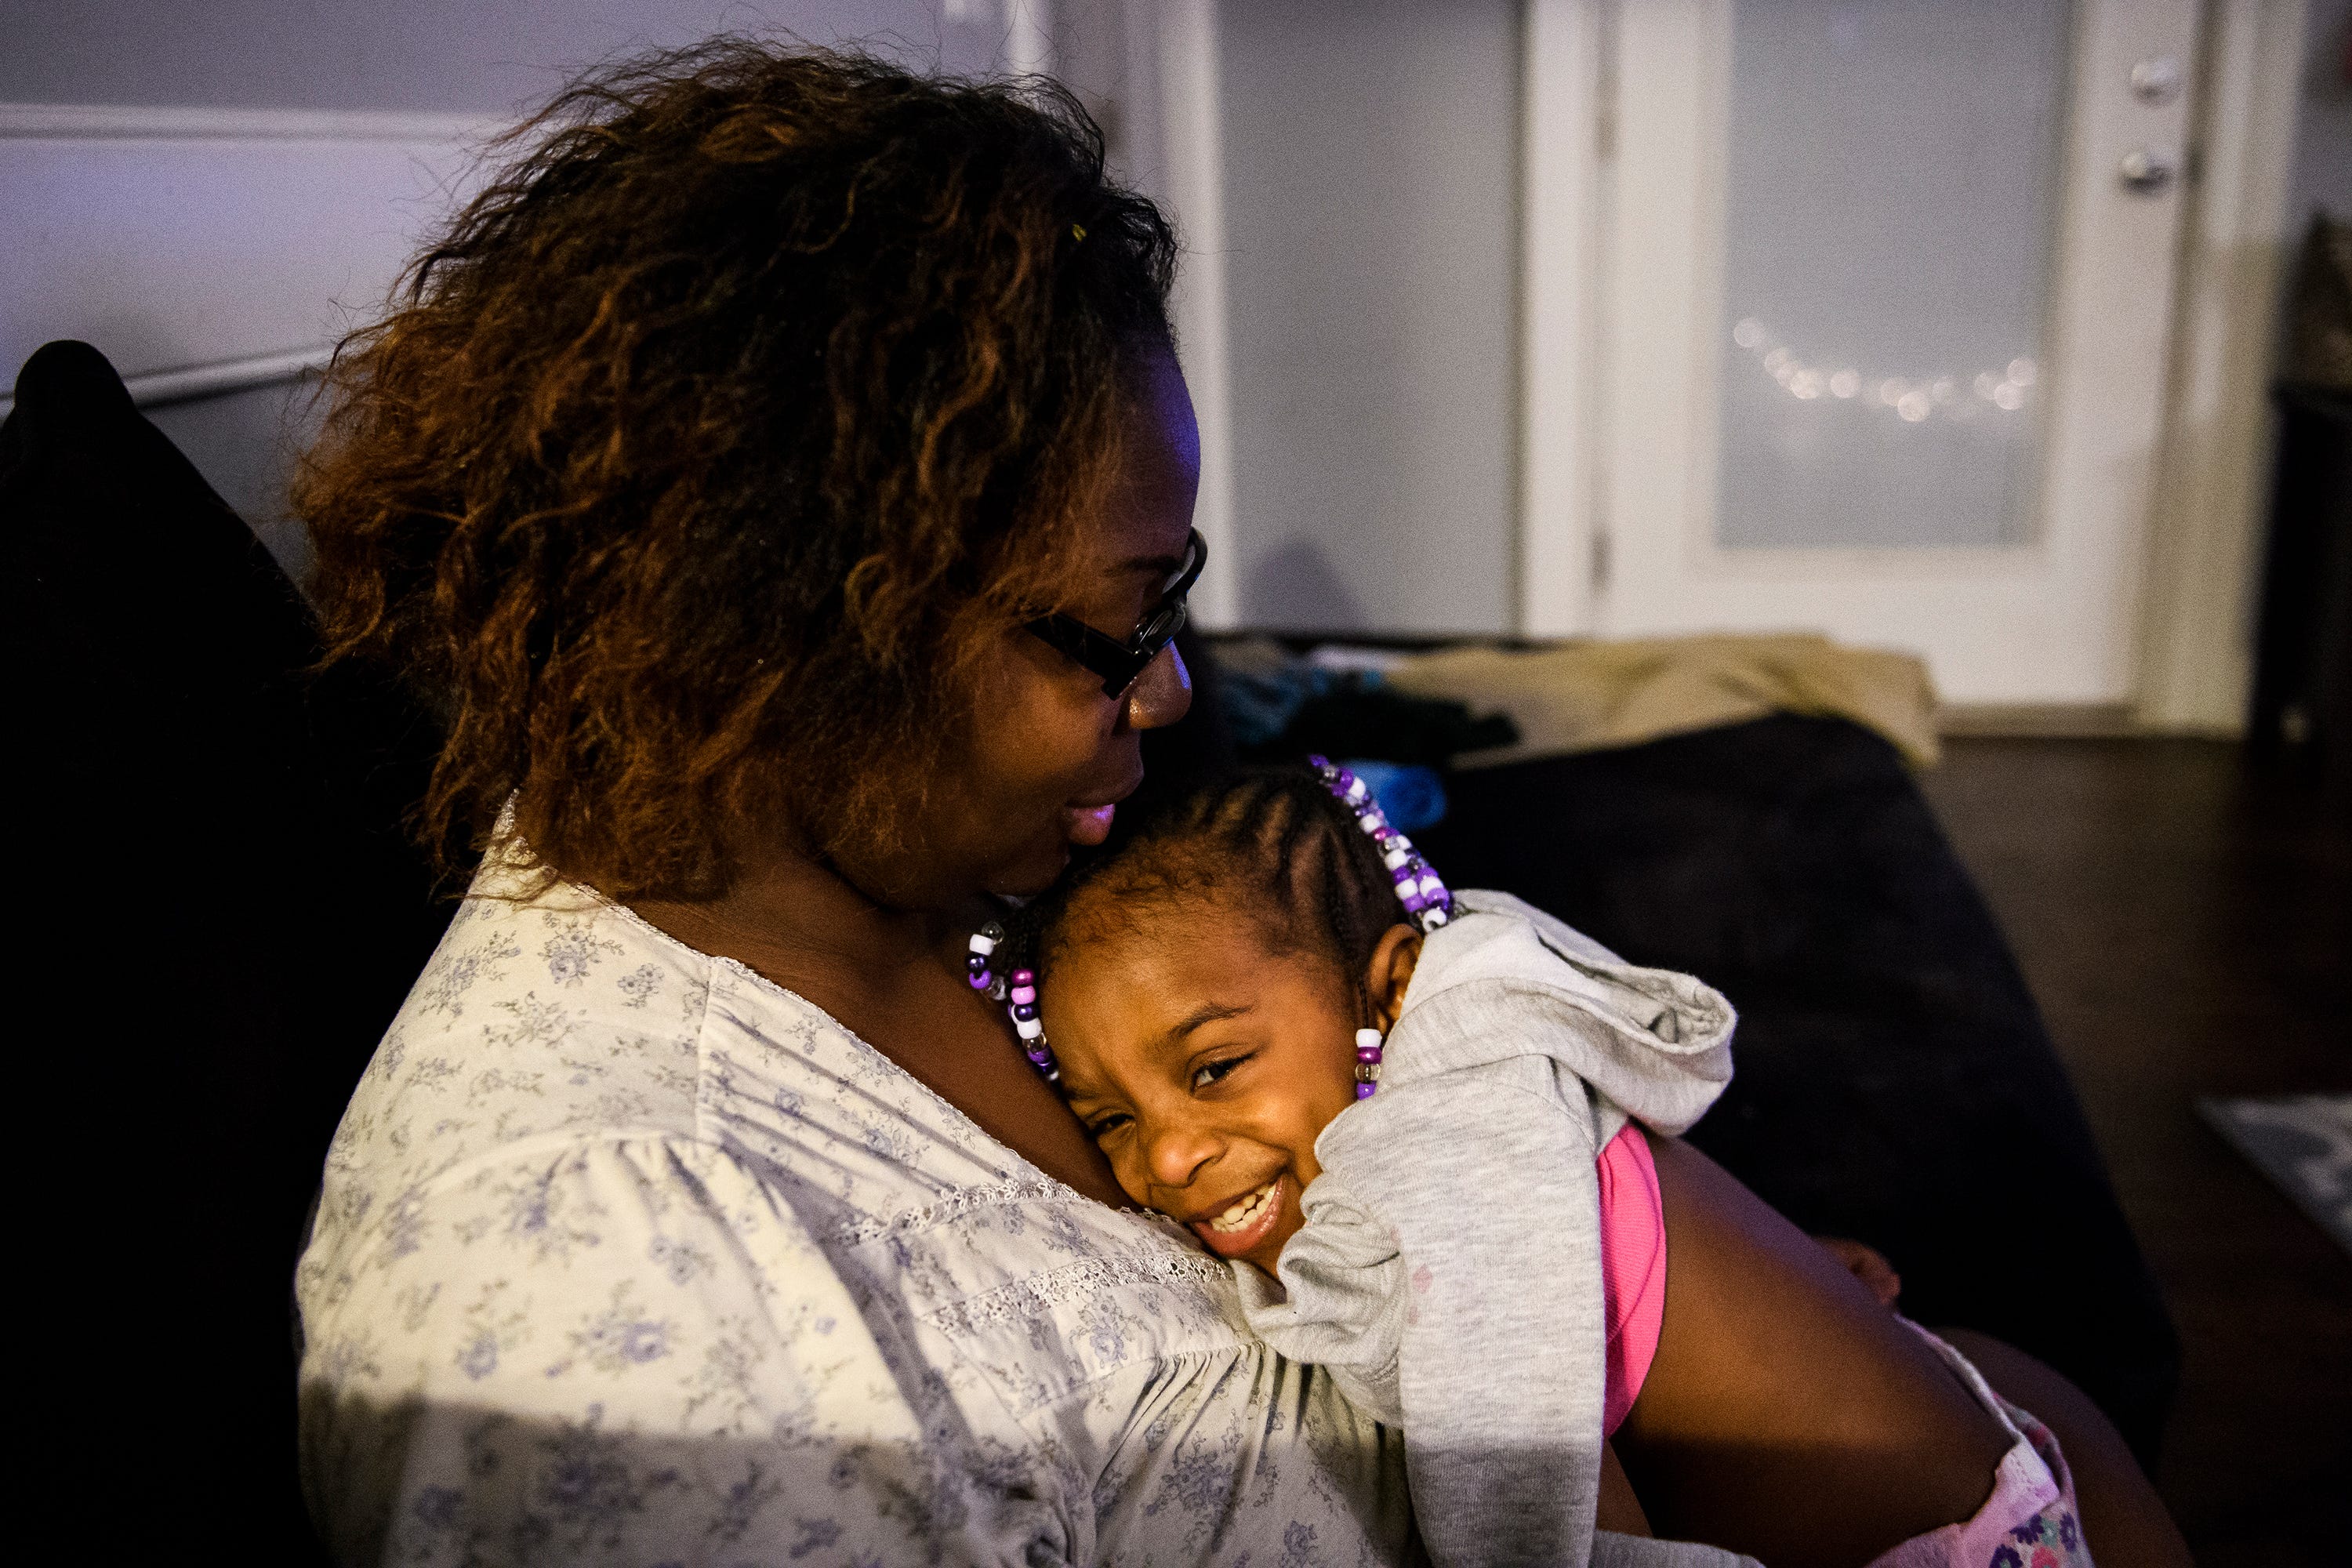 Tiffany Copeland embraces her daughter Jenilya, 3, inside her home on Monday, Dec. 17, 2018.